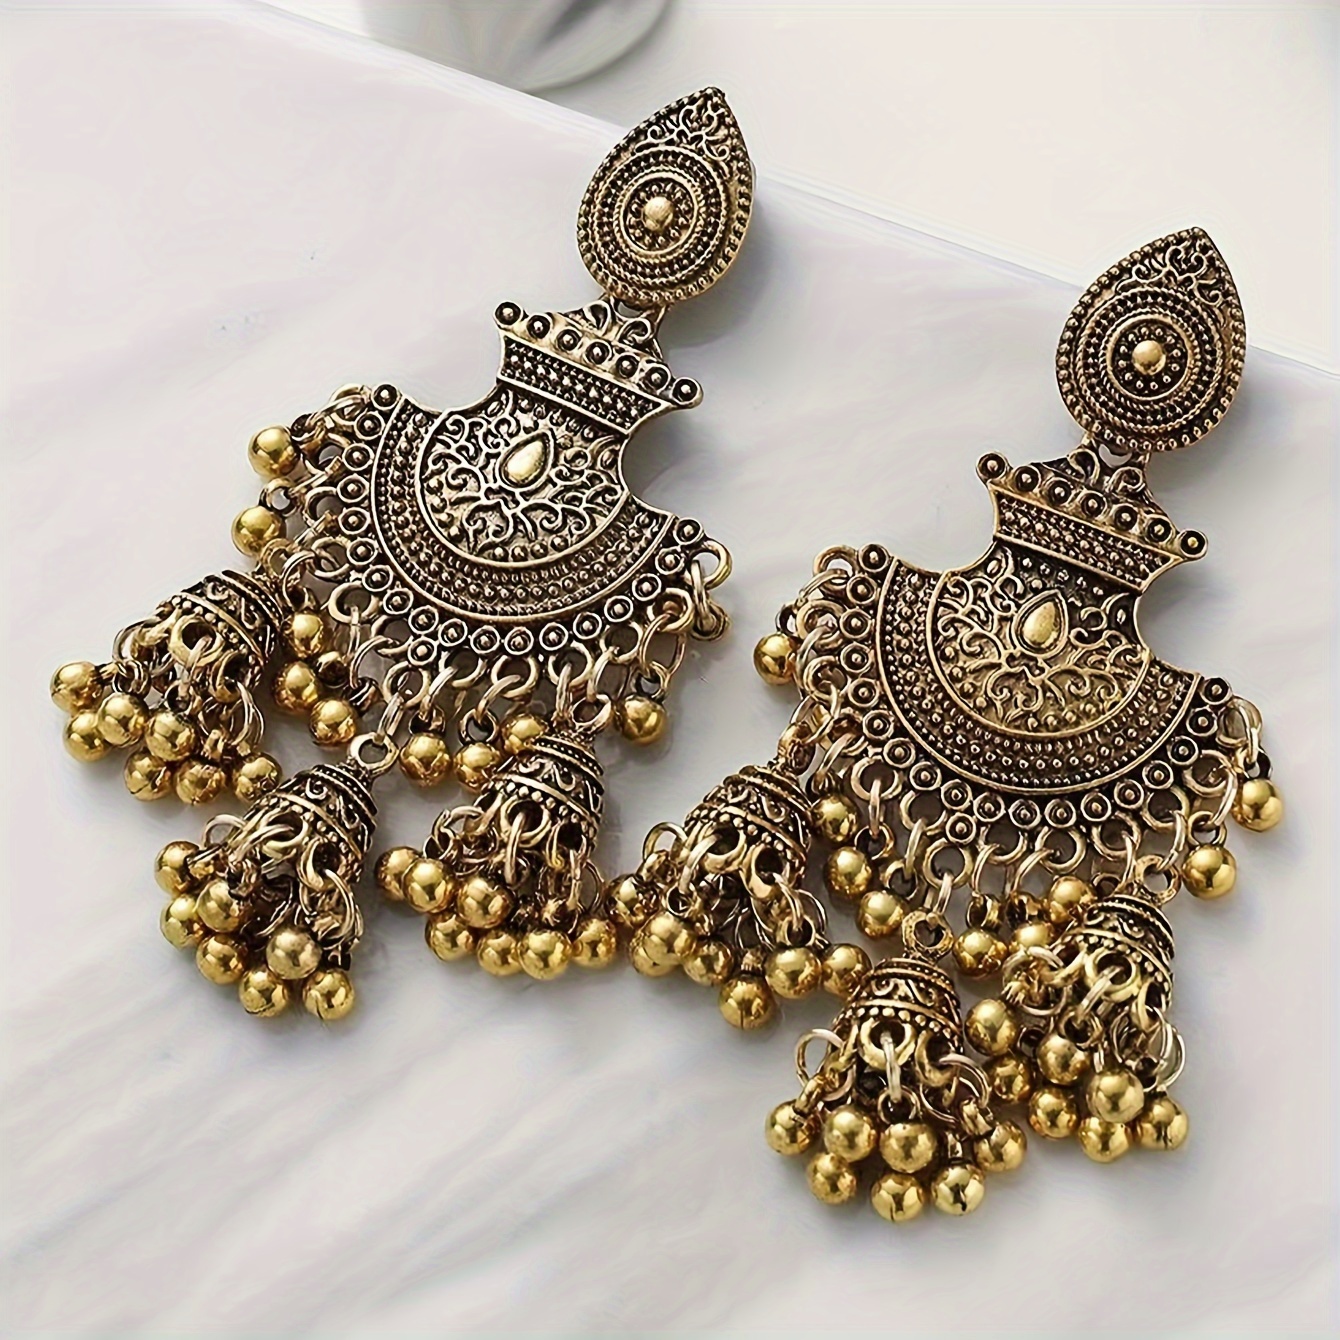 

Vintage Carved Pattern Bell Design Dangle Earrings Retro Bollywood Style Zinc Alloy Jewelry Creative Tourism Souvenir